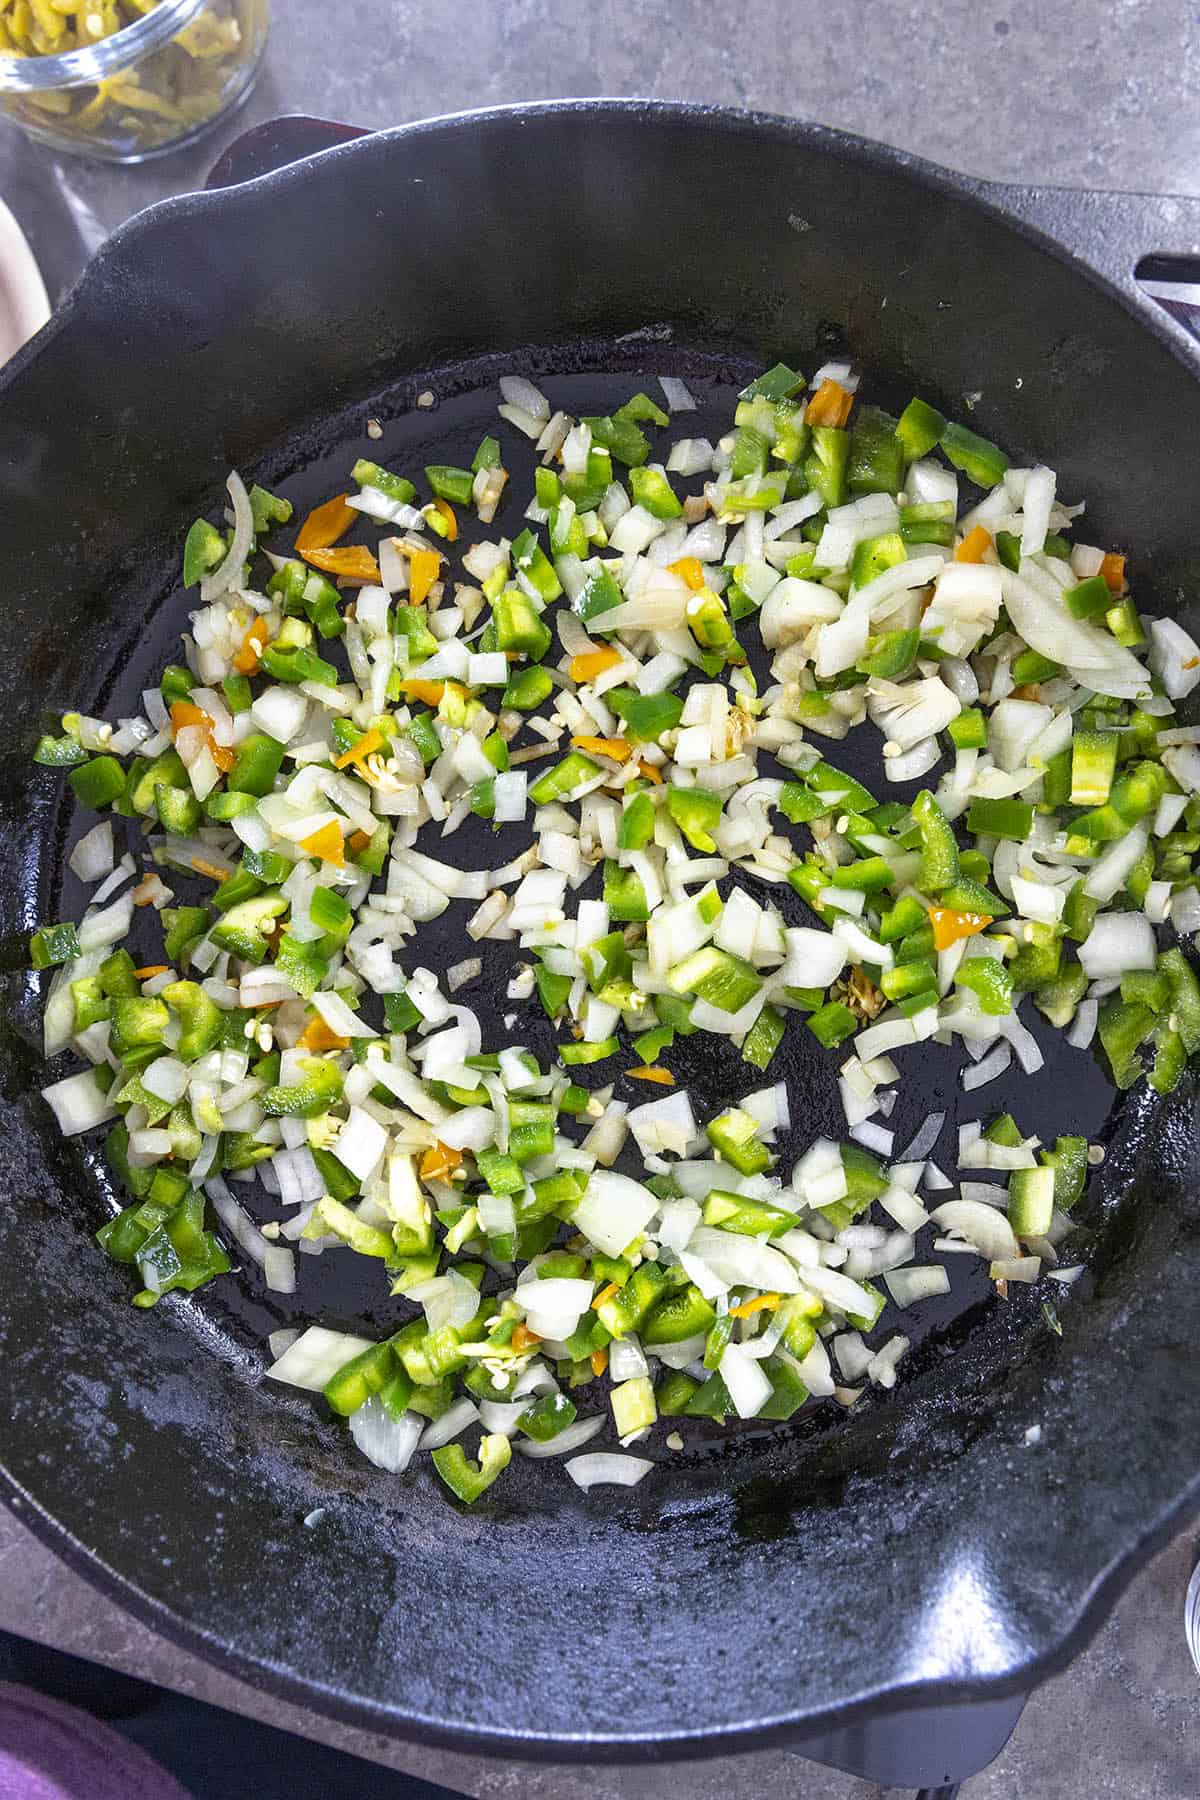 Cooking the vegetables in a pan